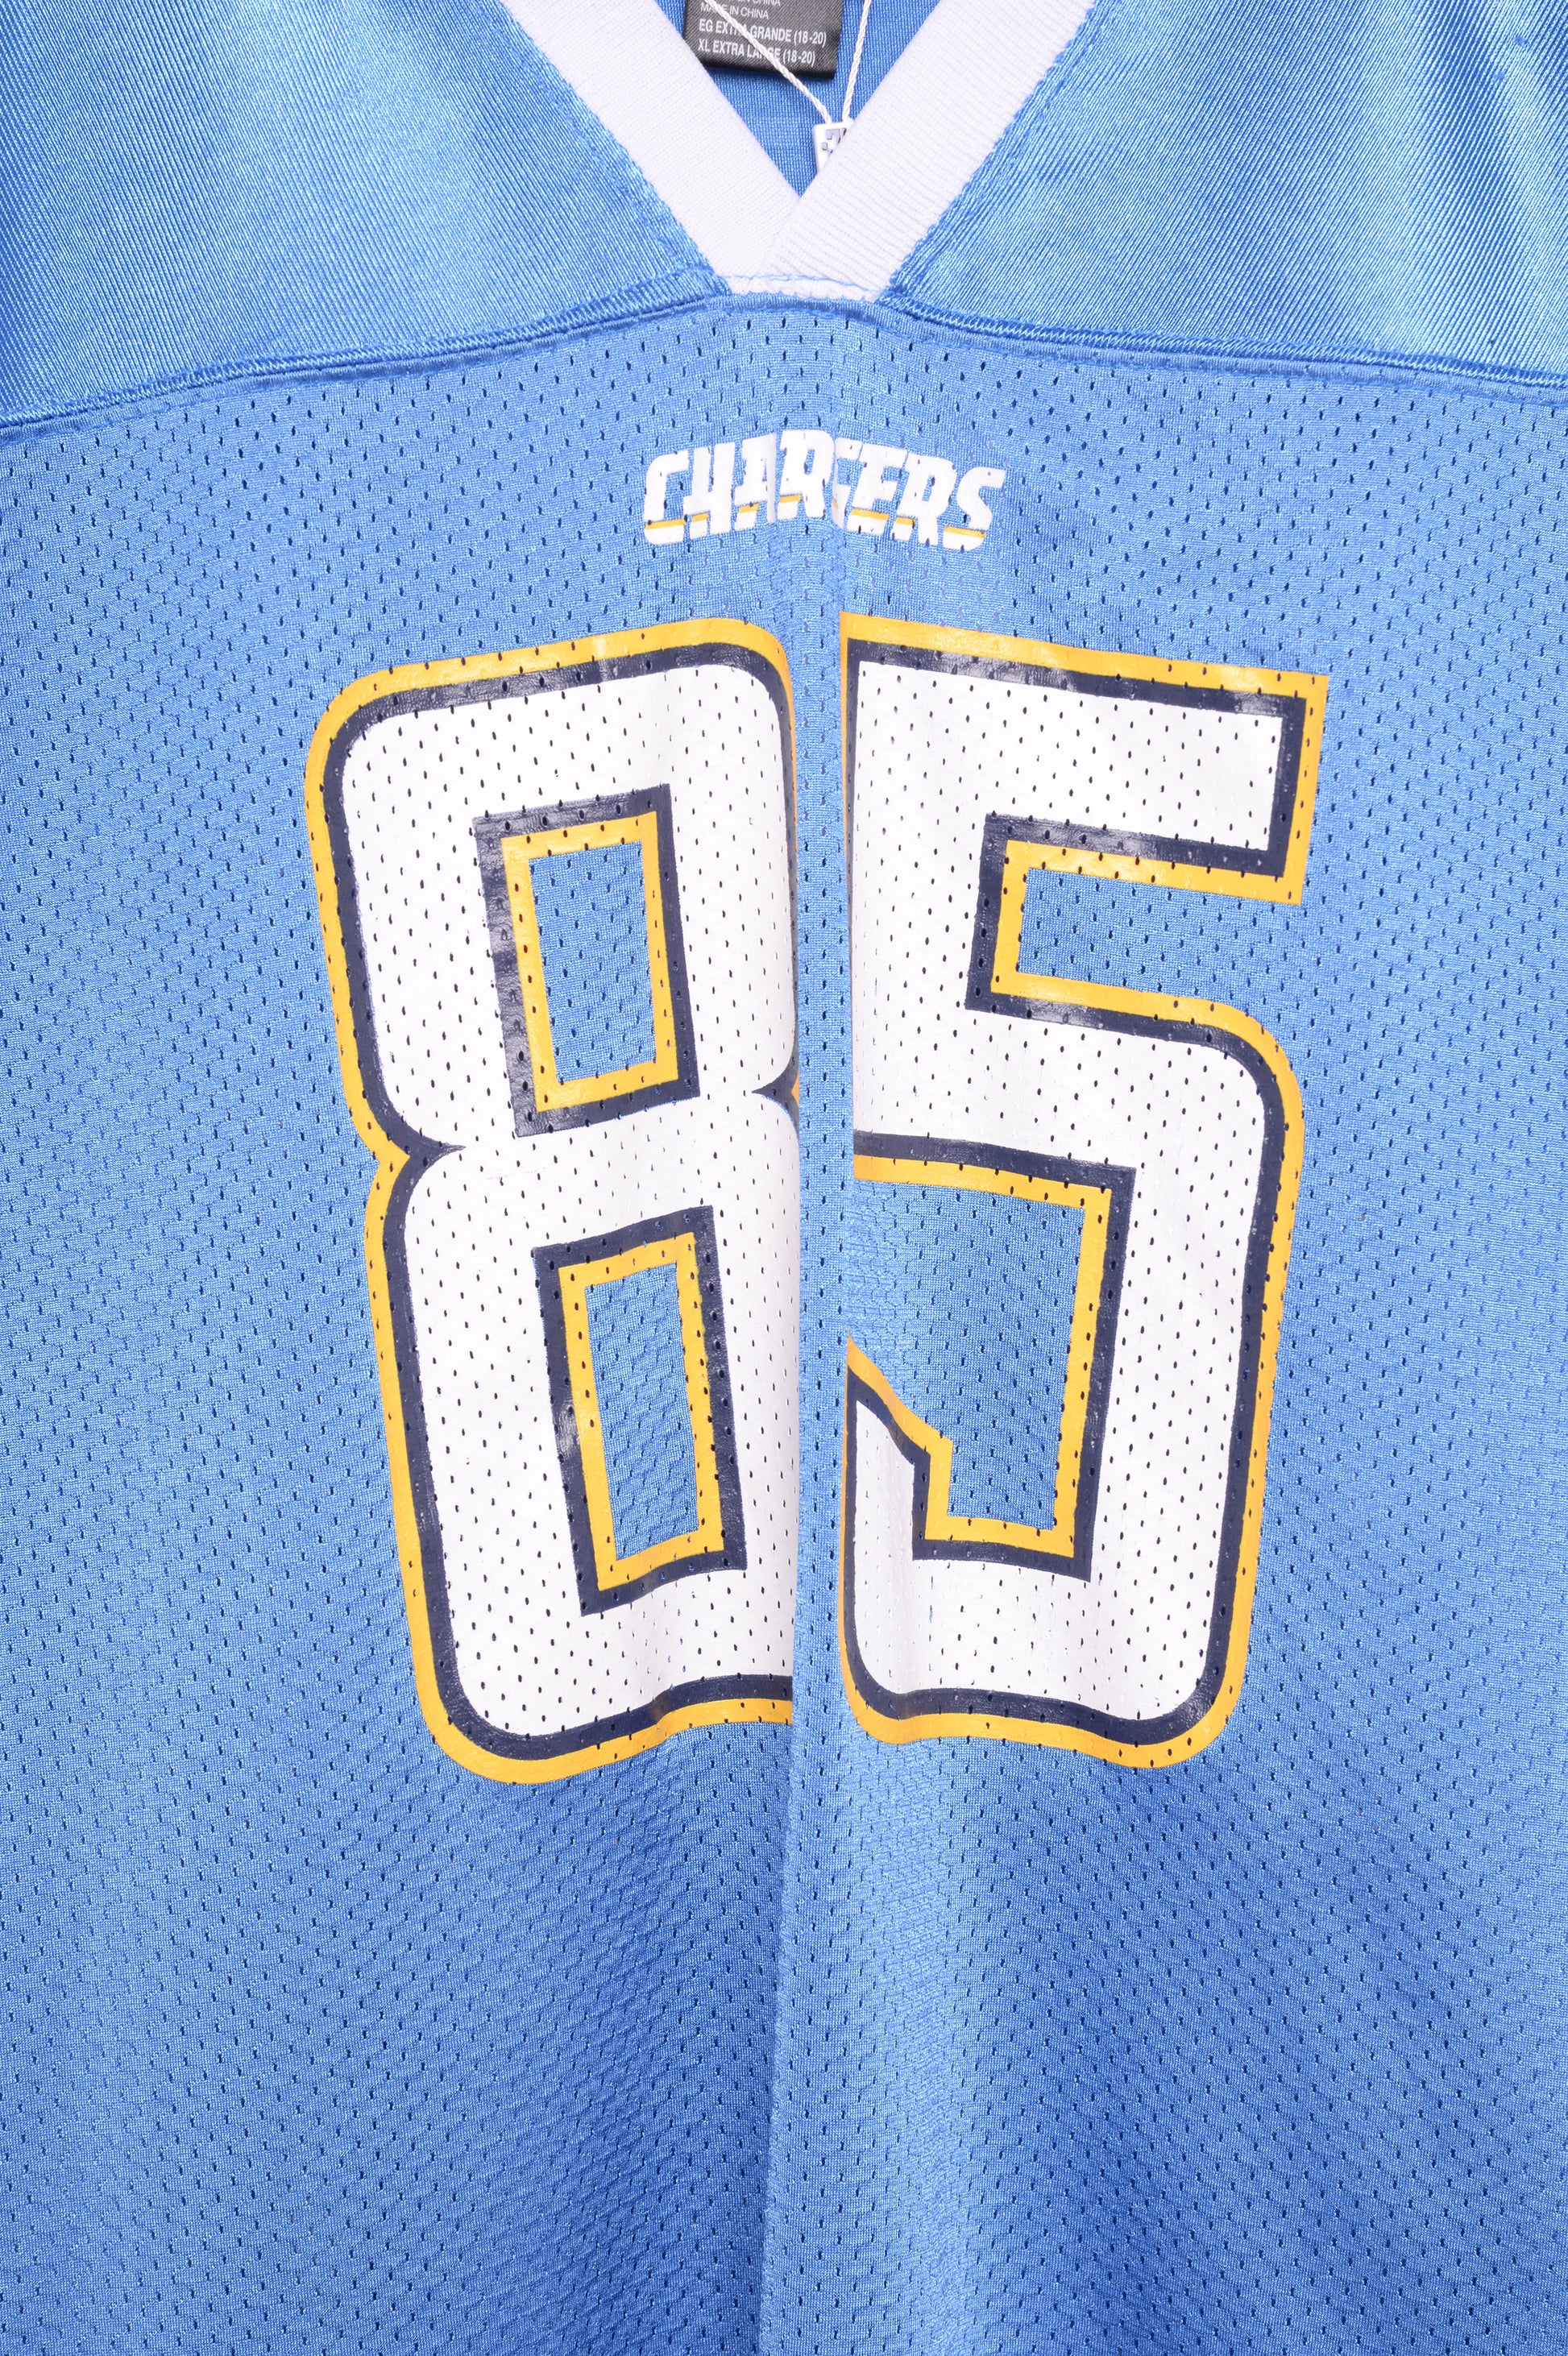 Los Angeles Chargers Jerseys, Chargers Uniforms